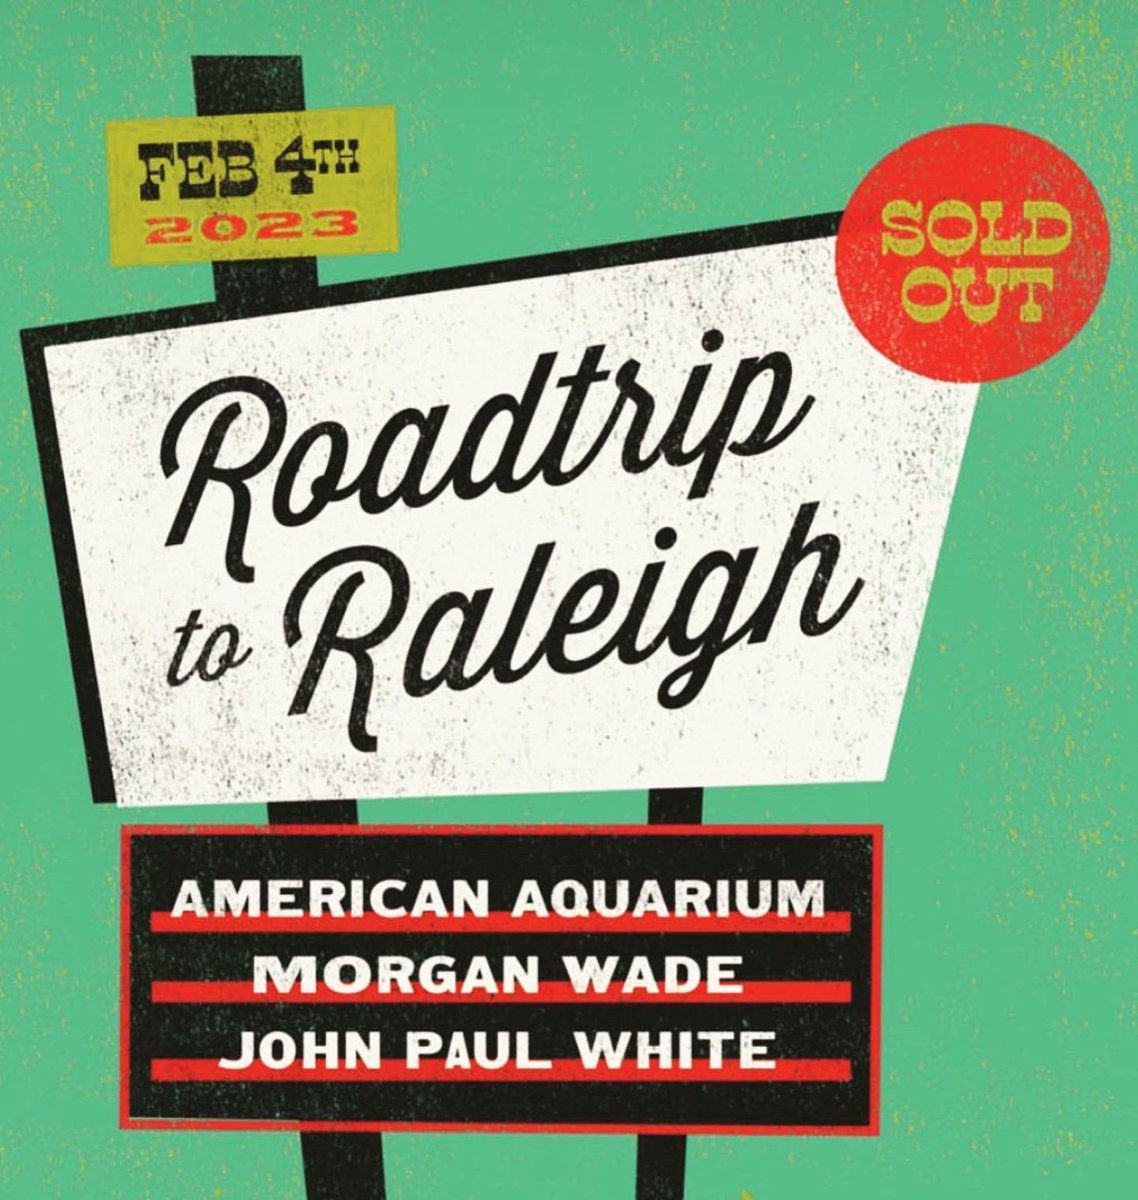 The annual pilgrimage to our state capital begins tomorrow (2/2) for many as NC’s own @USAquarium is set to host three straight nights at @LincolnRaleigh in the heart of Oak City! #RoadTriptoRaleigh #RedDirtNC